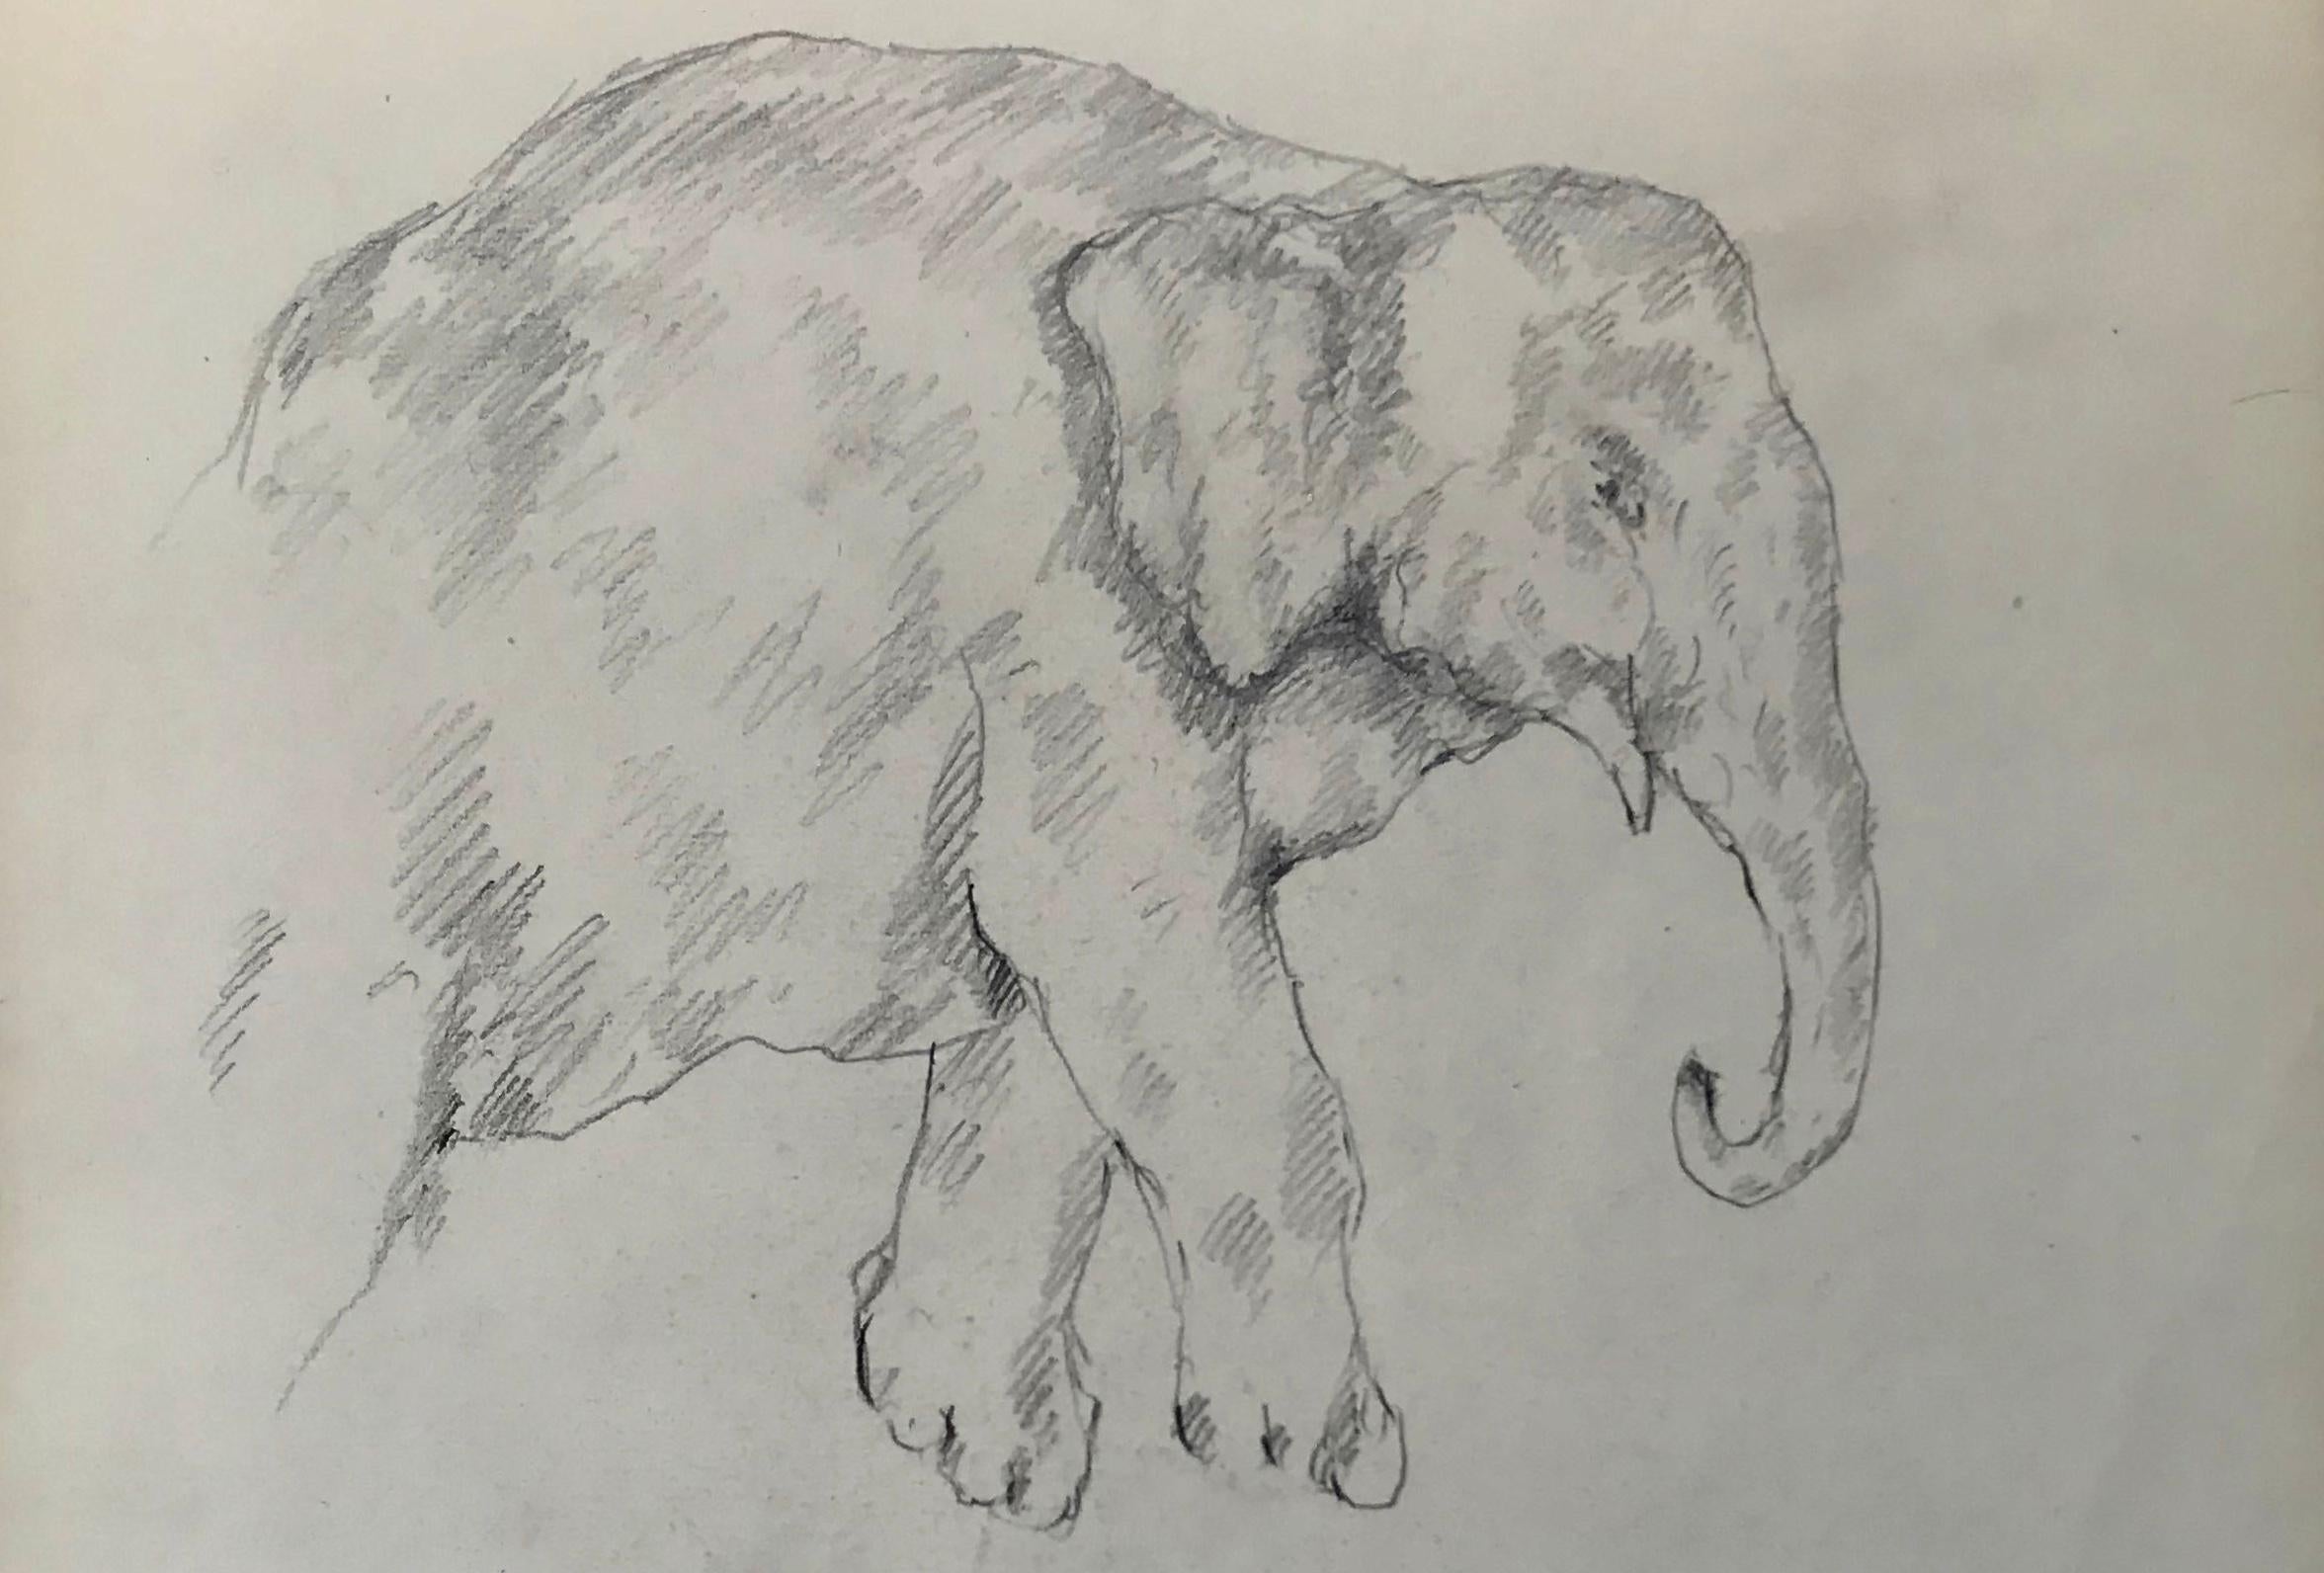 Elephant drawing, Guido Righetti, 1919. Original vintage Italian pencil drawings/sketches of an elephant in various poses from a series undertaken by Righetti for his sculptures in bronze including a boar, an elephant, a black cassoary, a white